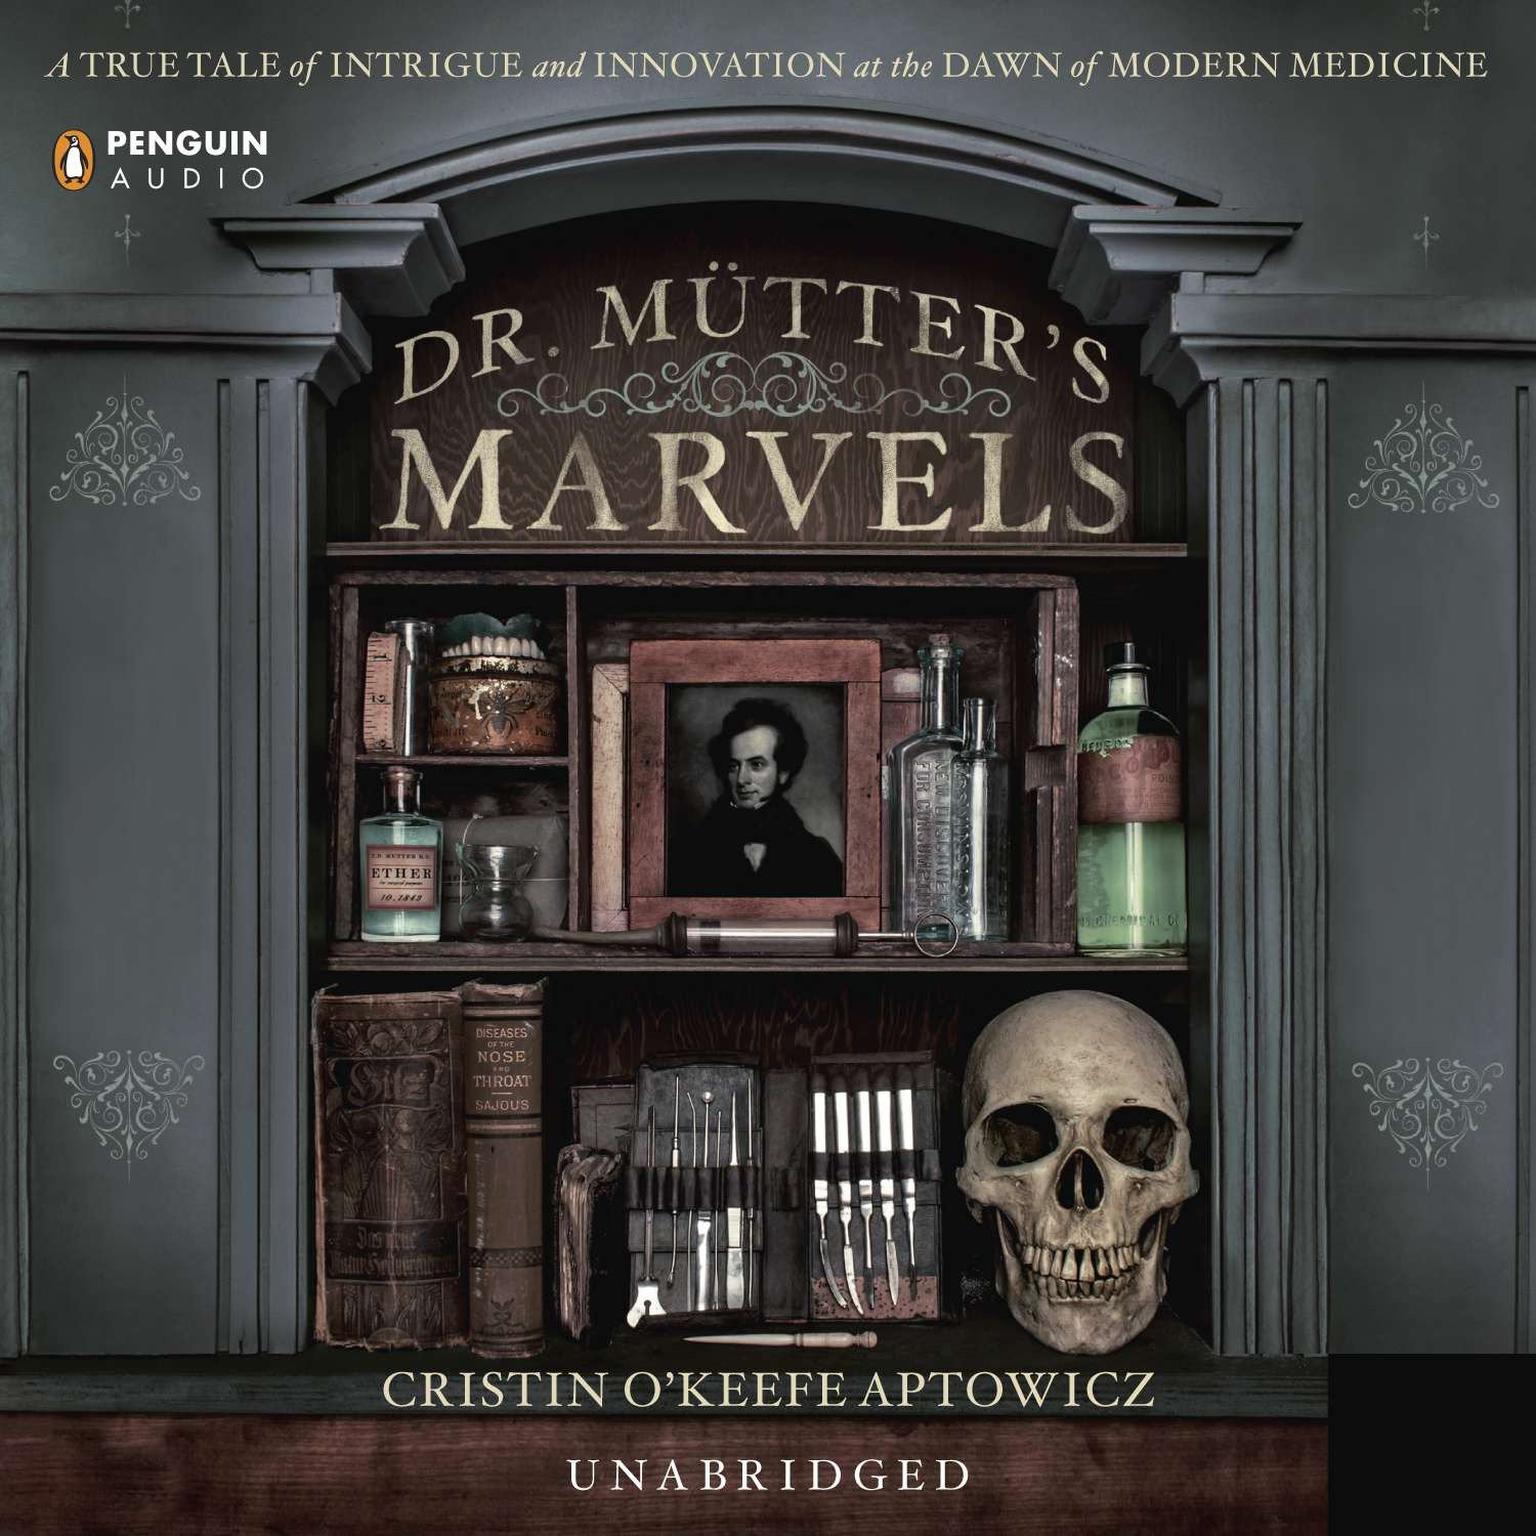 Dr. Mutters Marvels: A True Tale of Intrigue and Innovation at the Dawn of Modern Medicine Audiobook, by Cristin O’Keefe Aptowicz